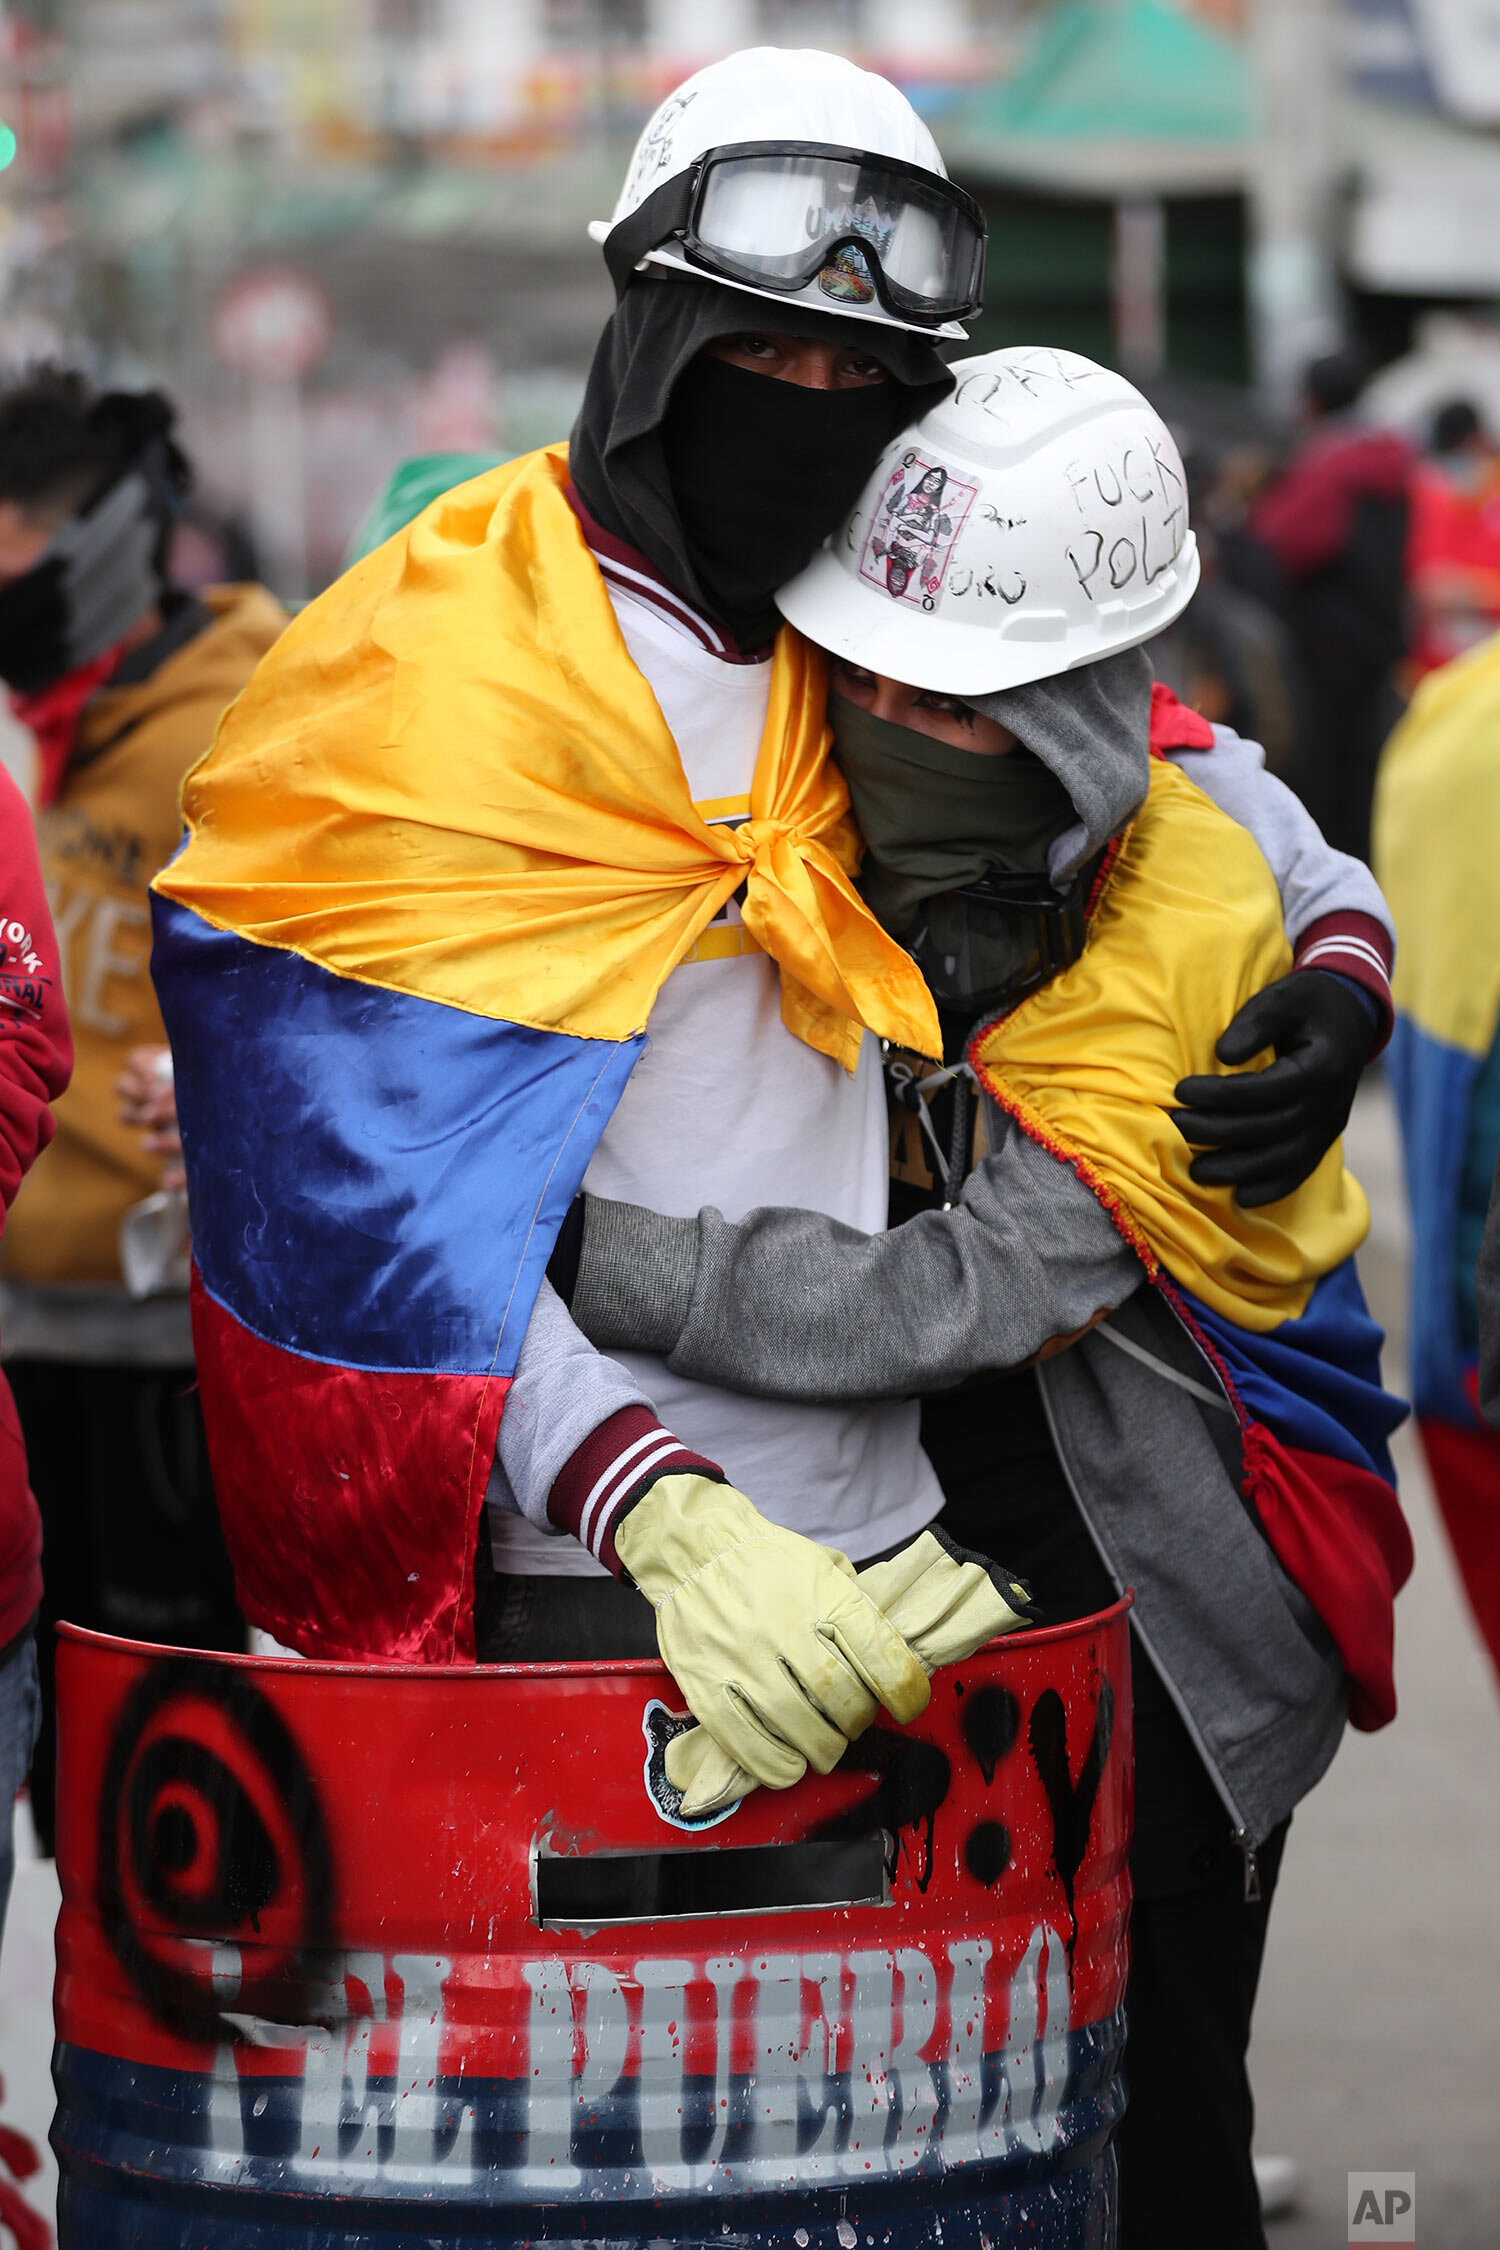  A couple embrace during ongoing anti-government protests triggered by government proposed tax increases on public services, fuel, wages and pensions in Bogota, Colombia, May 28, 2021. (AP Photo/Fernando Vergara) 